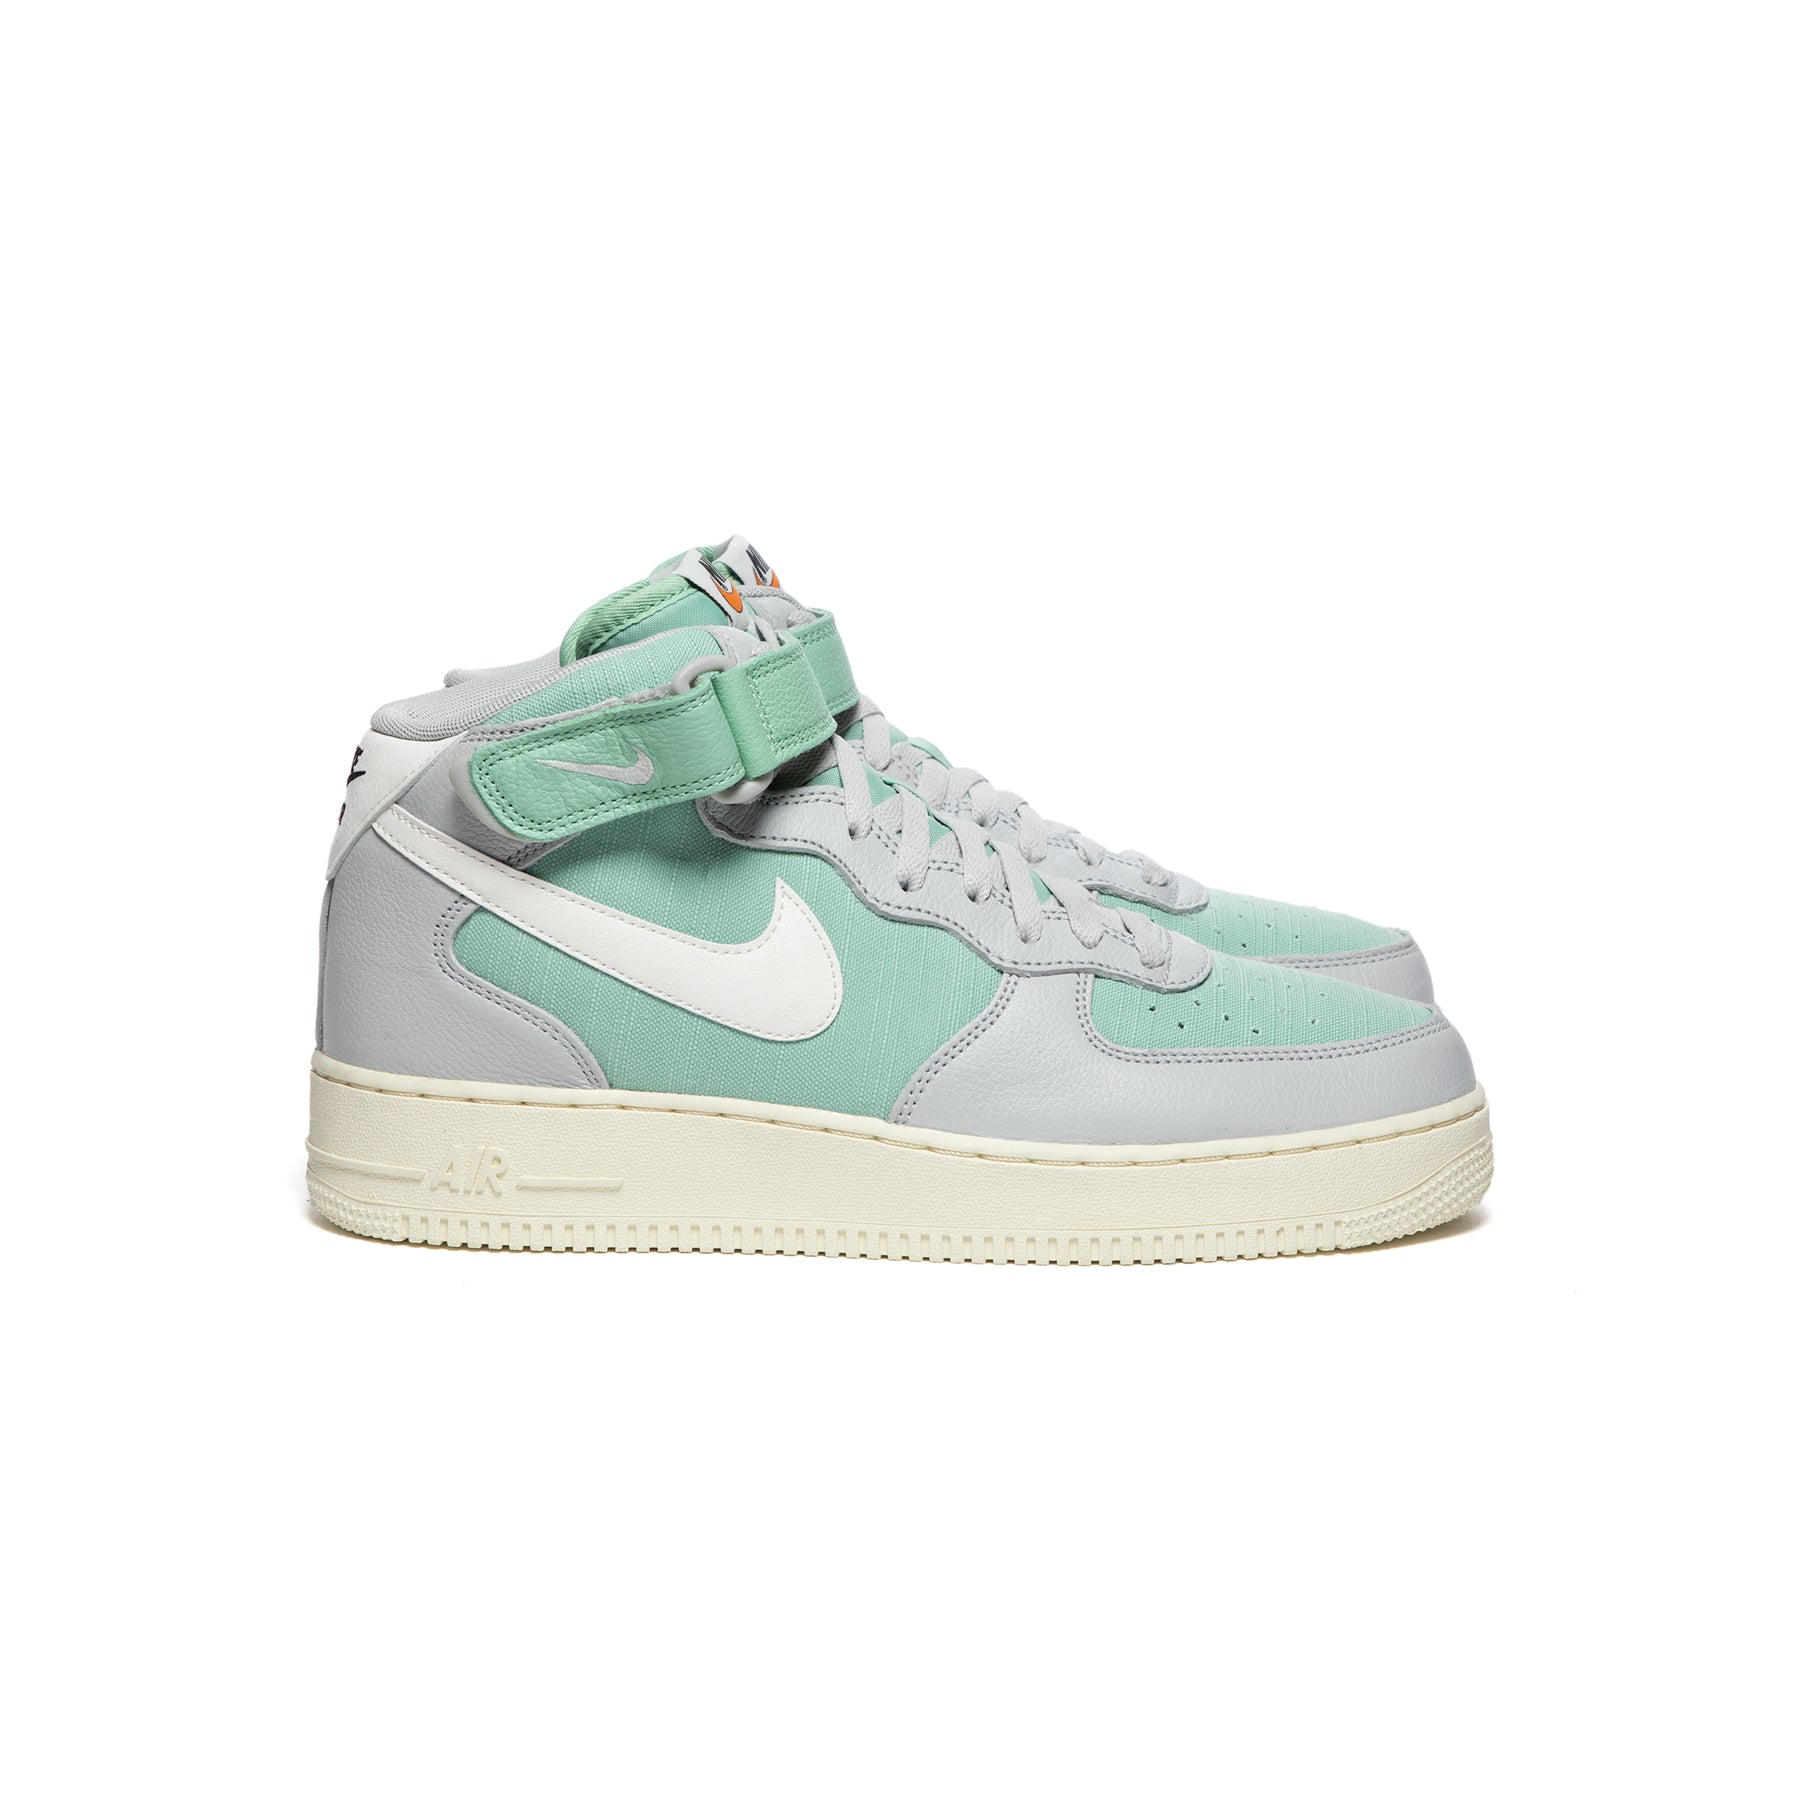 Official Images: Nike Air Force 1 'Enamel Green' Canvas - Sneaker